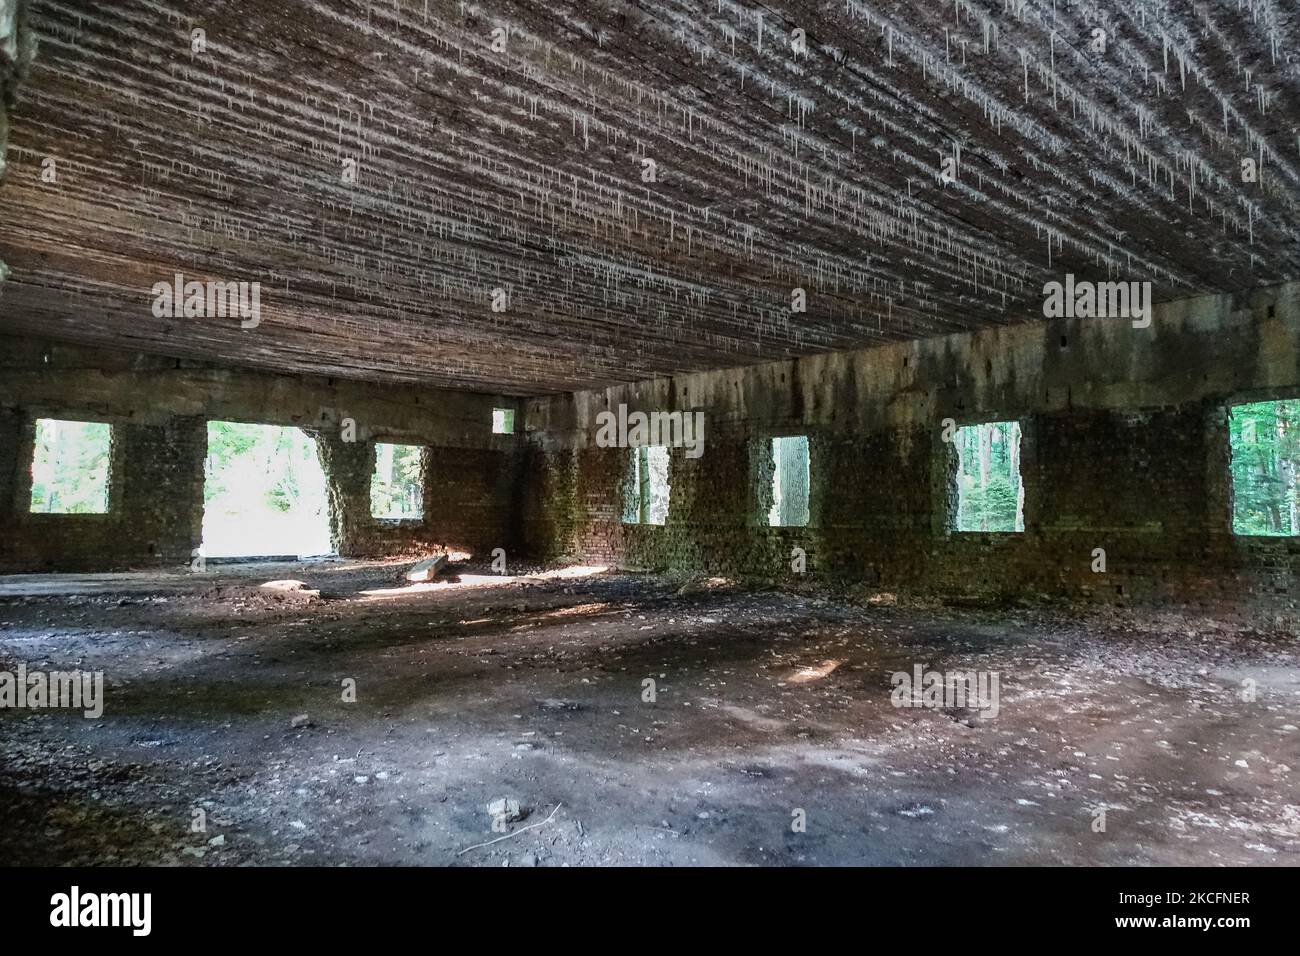 People visiting the WWII era Adolf Hitler's quarters hidden in a forest near Gierloz, Poland, are seen on 2 June 2021 r Wolf's Lair (ger. Wolfsschanze) ruins of Adolf Hilter's war headquarters was a hidden town in the woods consisting of 200 buildings: shelters, barracks, 2 airports, a power station, a railway station, air-conditioners, water supplies, heat-generating plants and two teleprinters (Photo by Michal Fludra/NurPhoto) Stock Photo